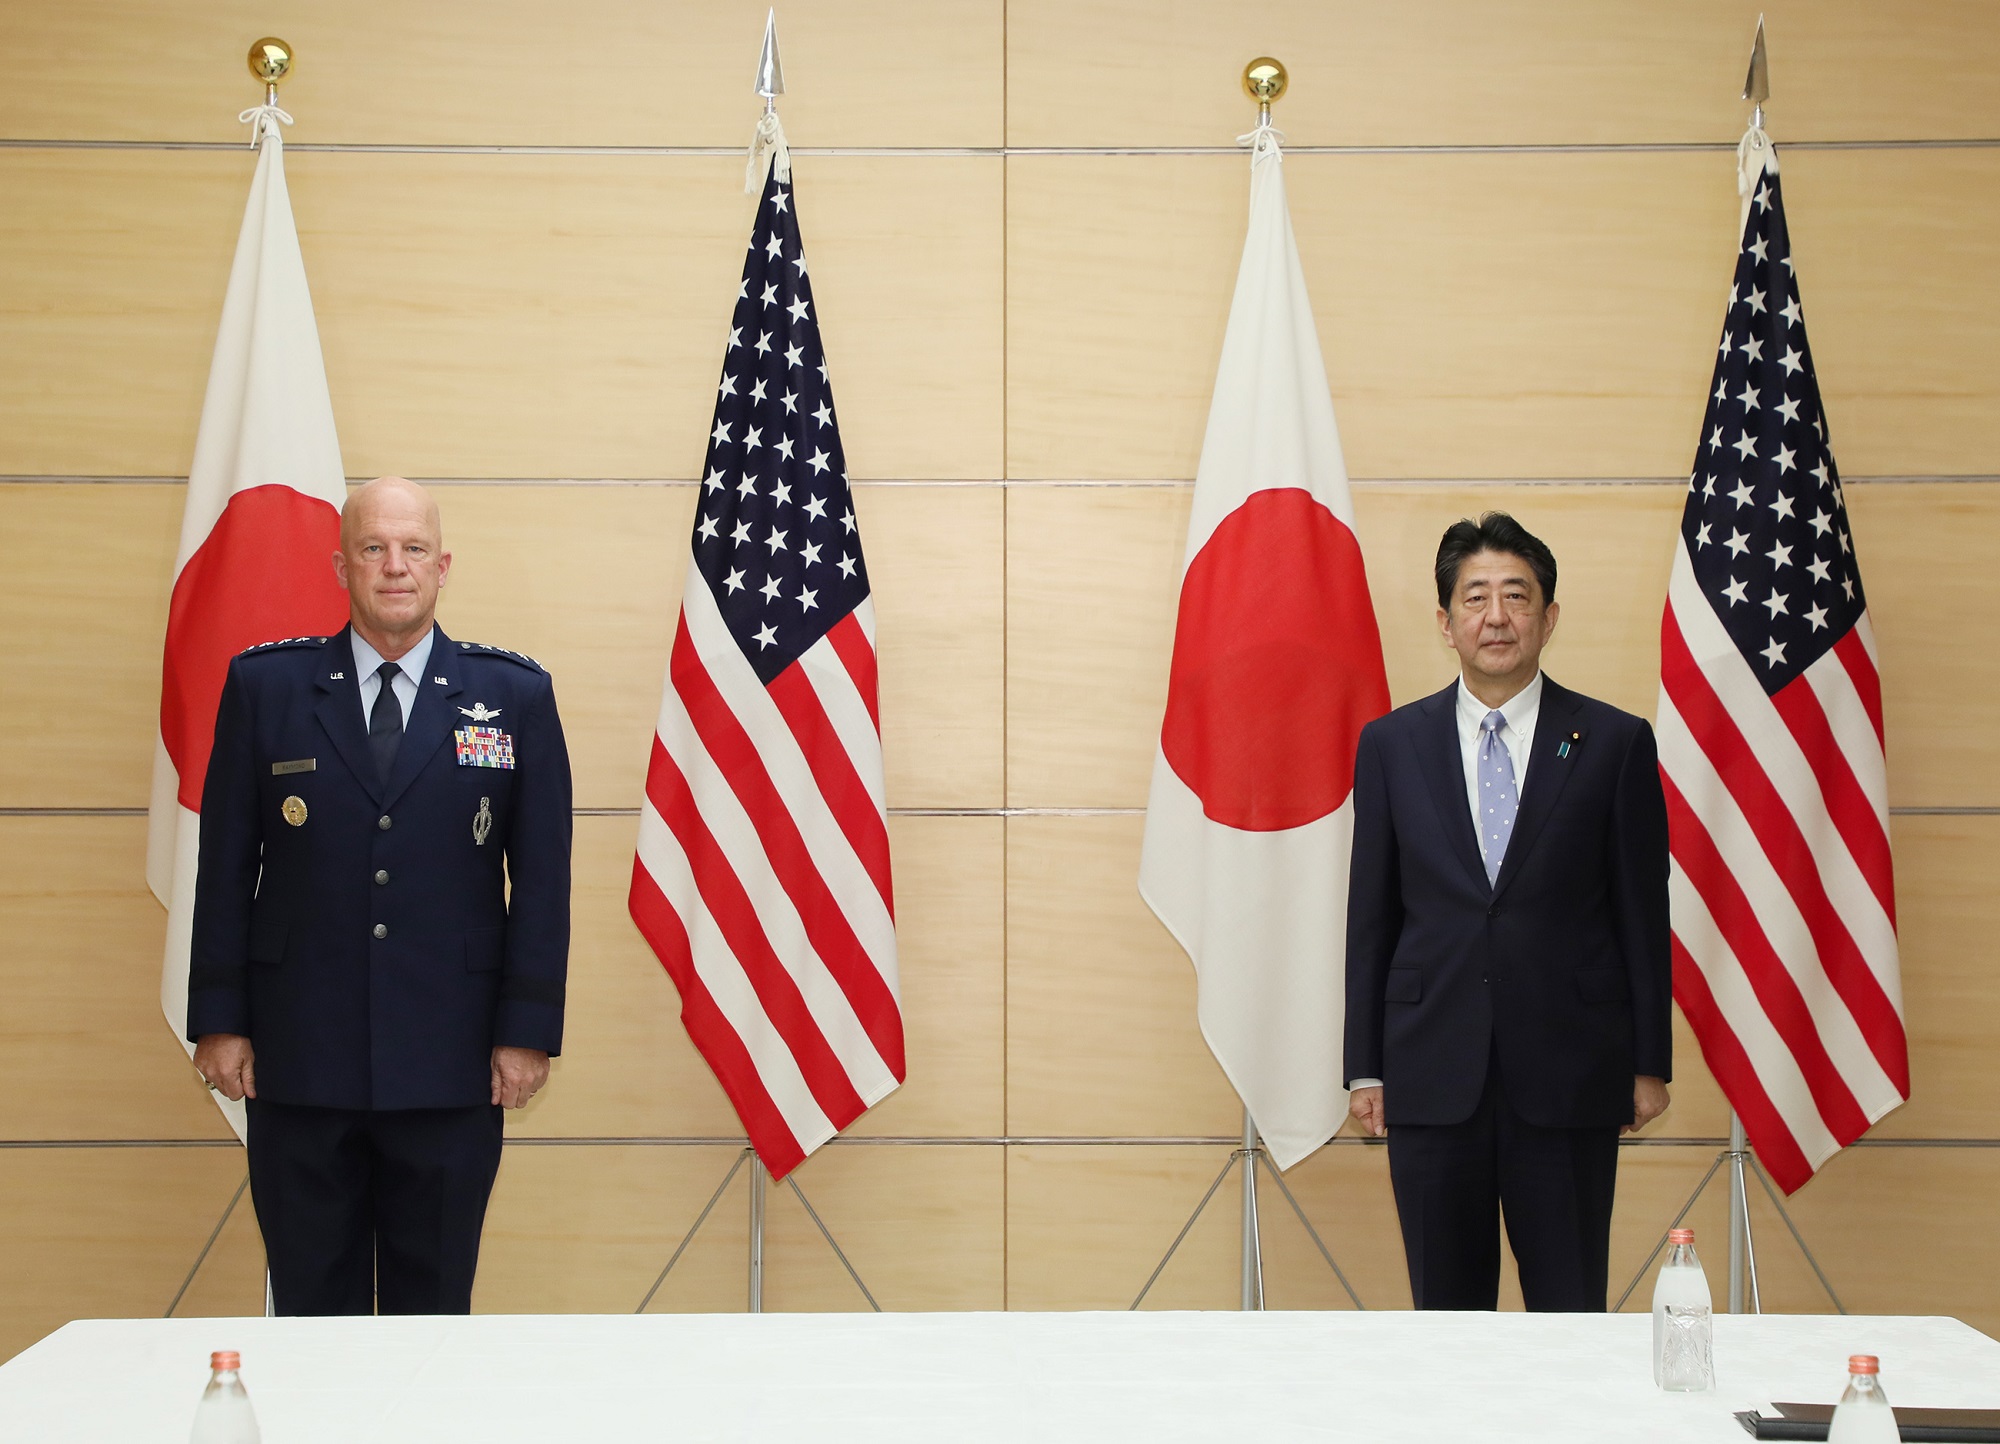 Gen. Jay Raymond, Chief of Space Operations, United States Space Force, and Shinzo Abe, Prime Minister of Japan, in front of U.S. and Japanese flags